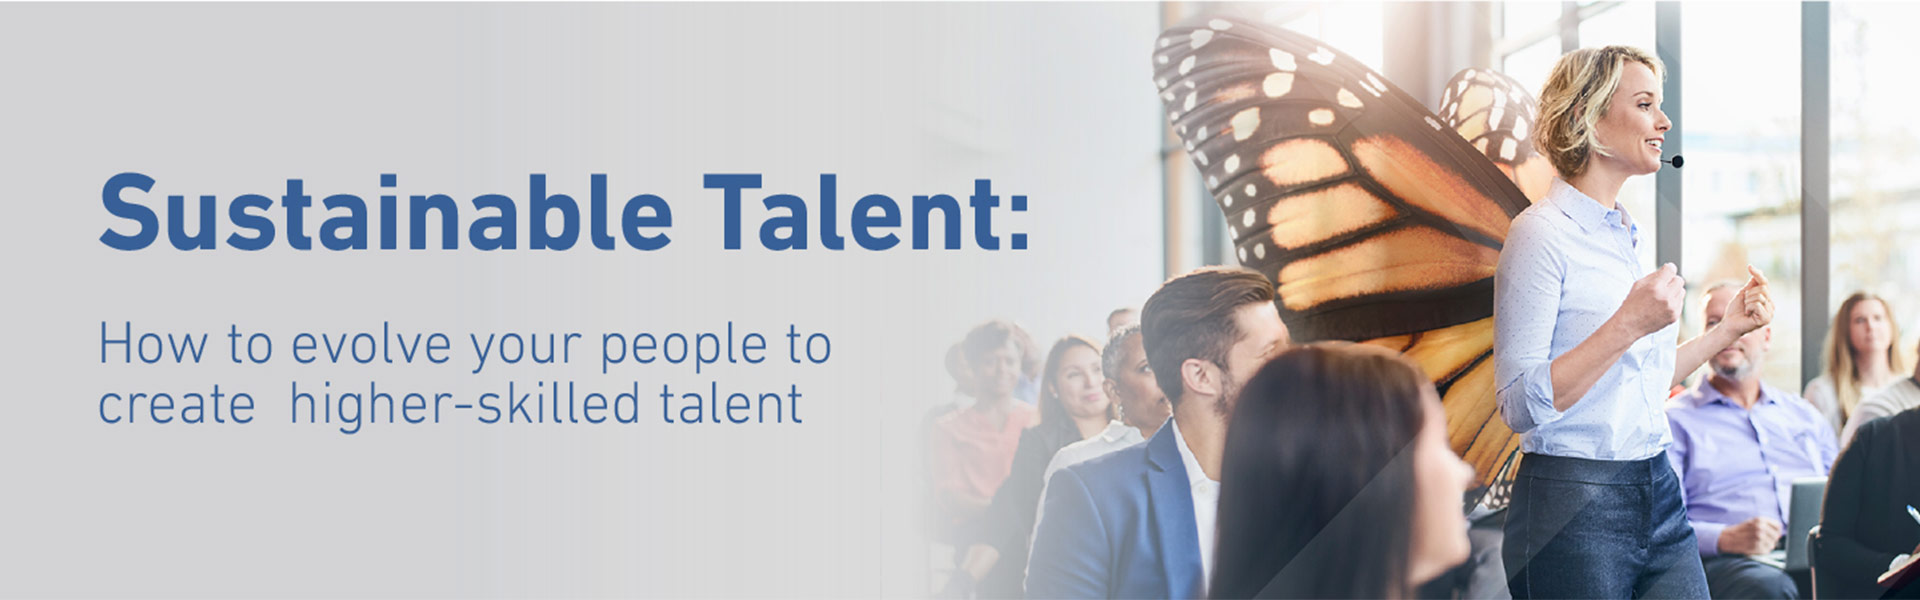 Sustainable Talent – How to evolve your people to create higher-skilled talent